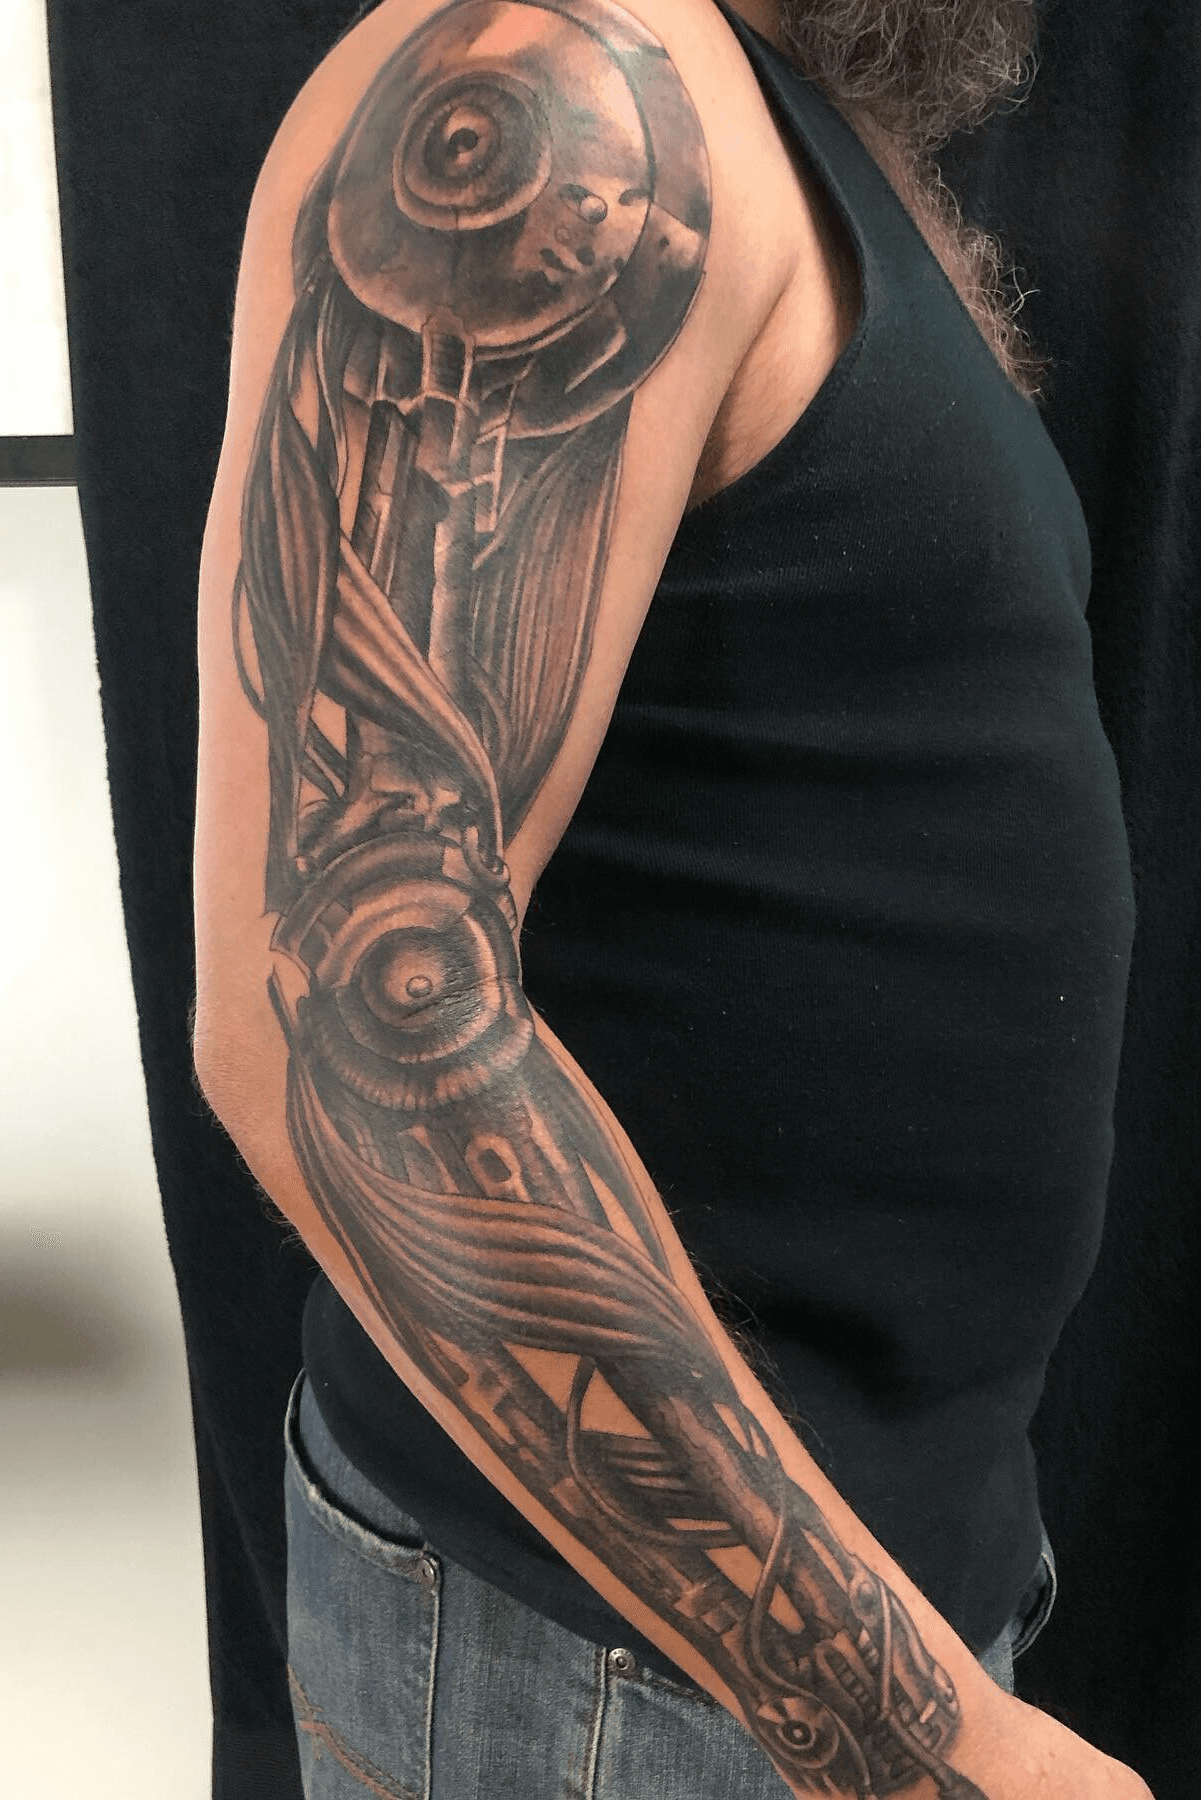 This bionic arm sleeve by drazpalaming is all elite             tattootribecommunity Visit wwwthetattootribecom and  Instagram